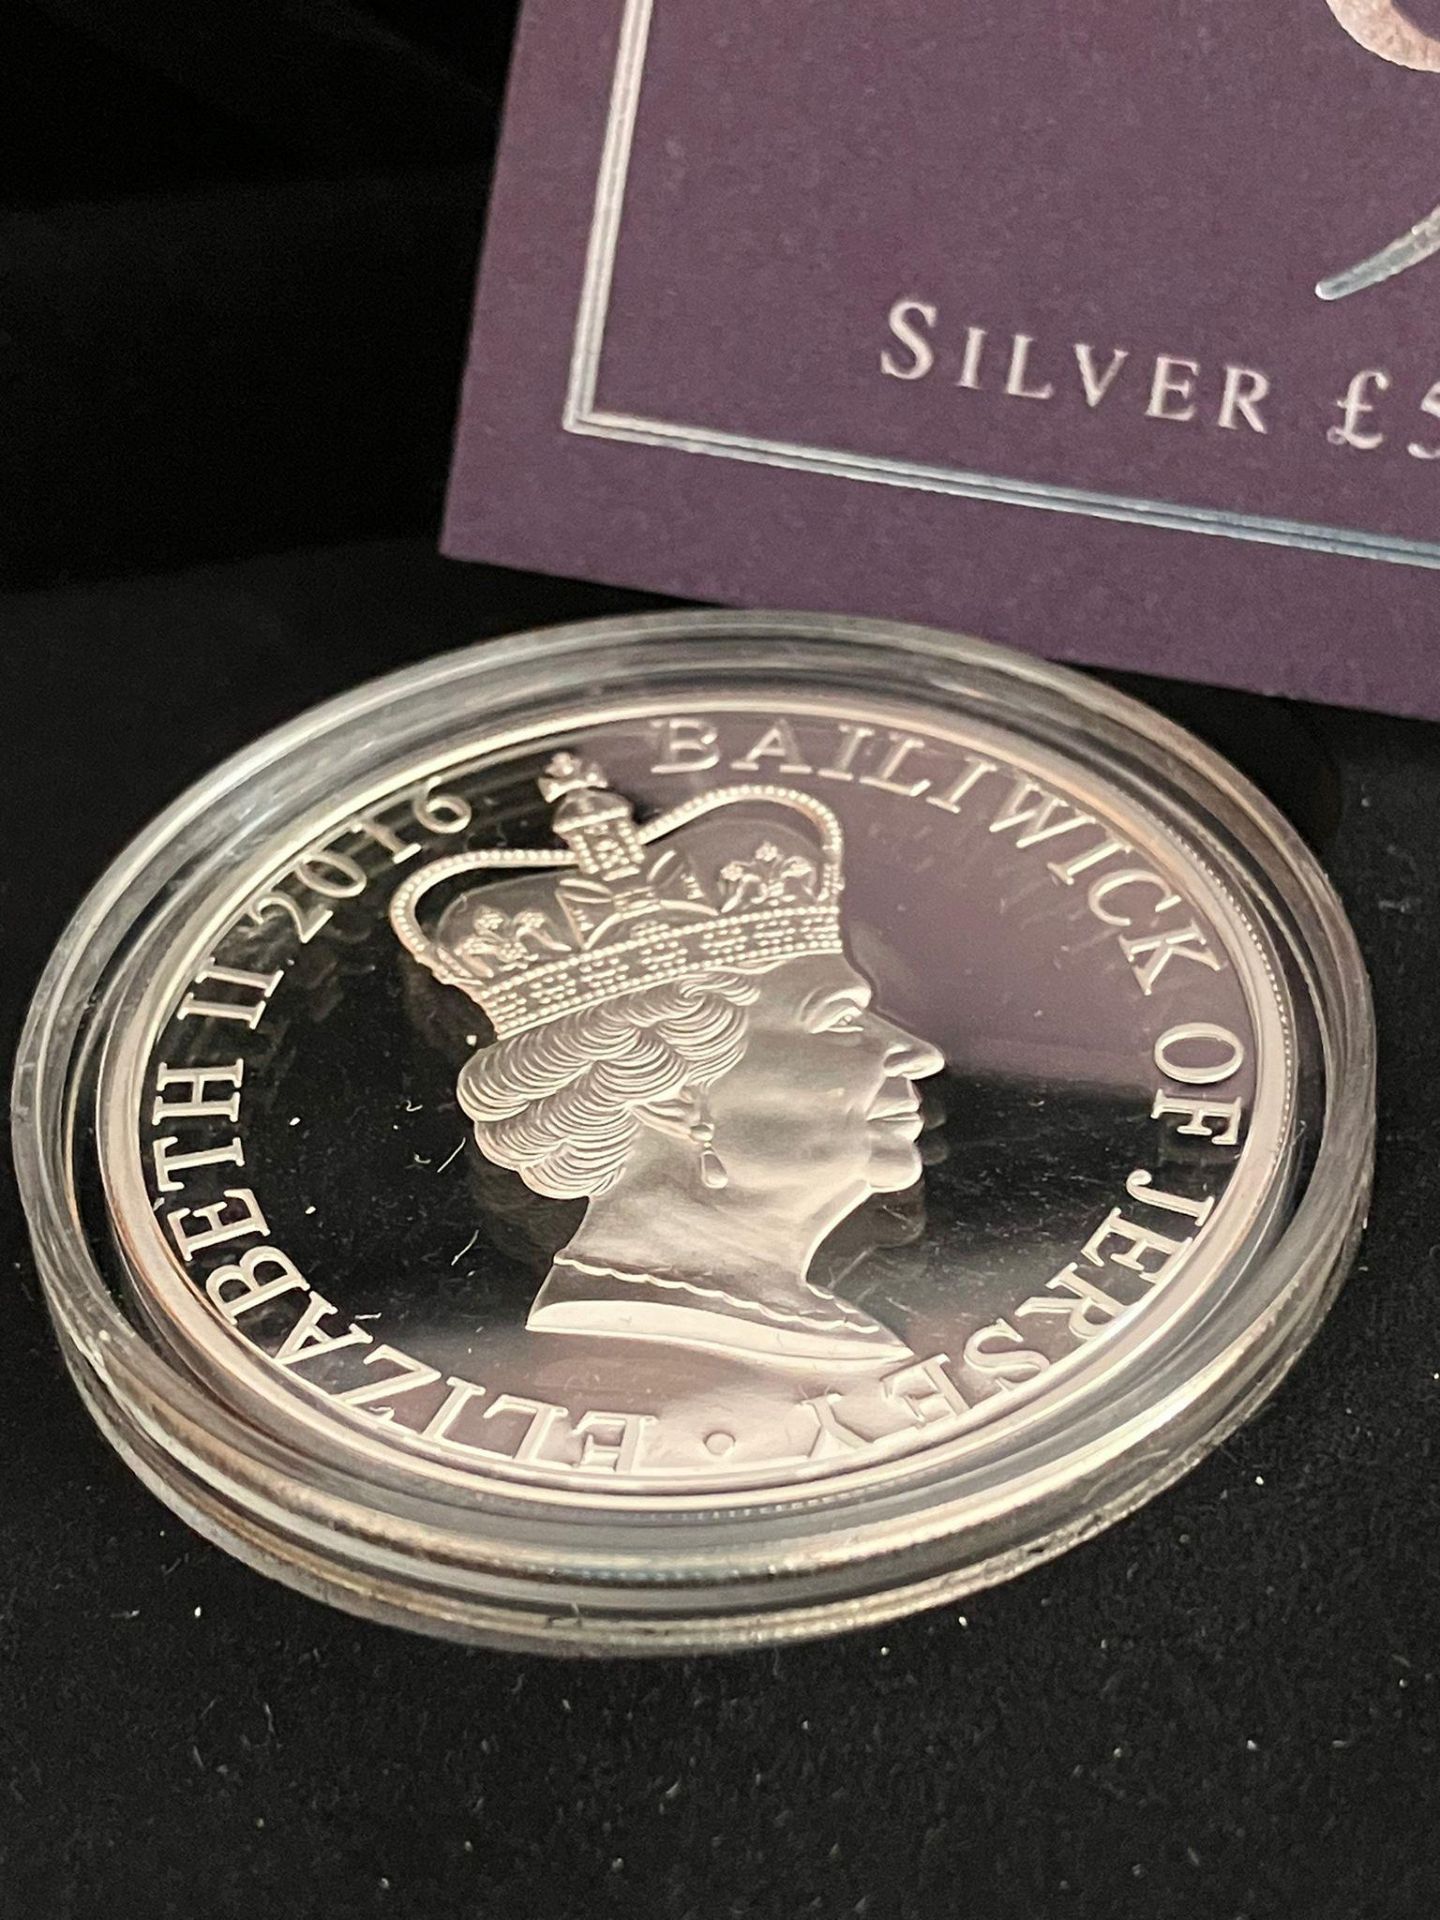 SILVER PROOF £5 COIN issued in 2016 to mark Queen Elizabeth’s 90th birthday. Complete with - Image 3 of 4